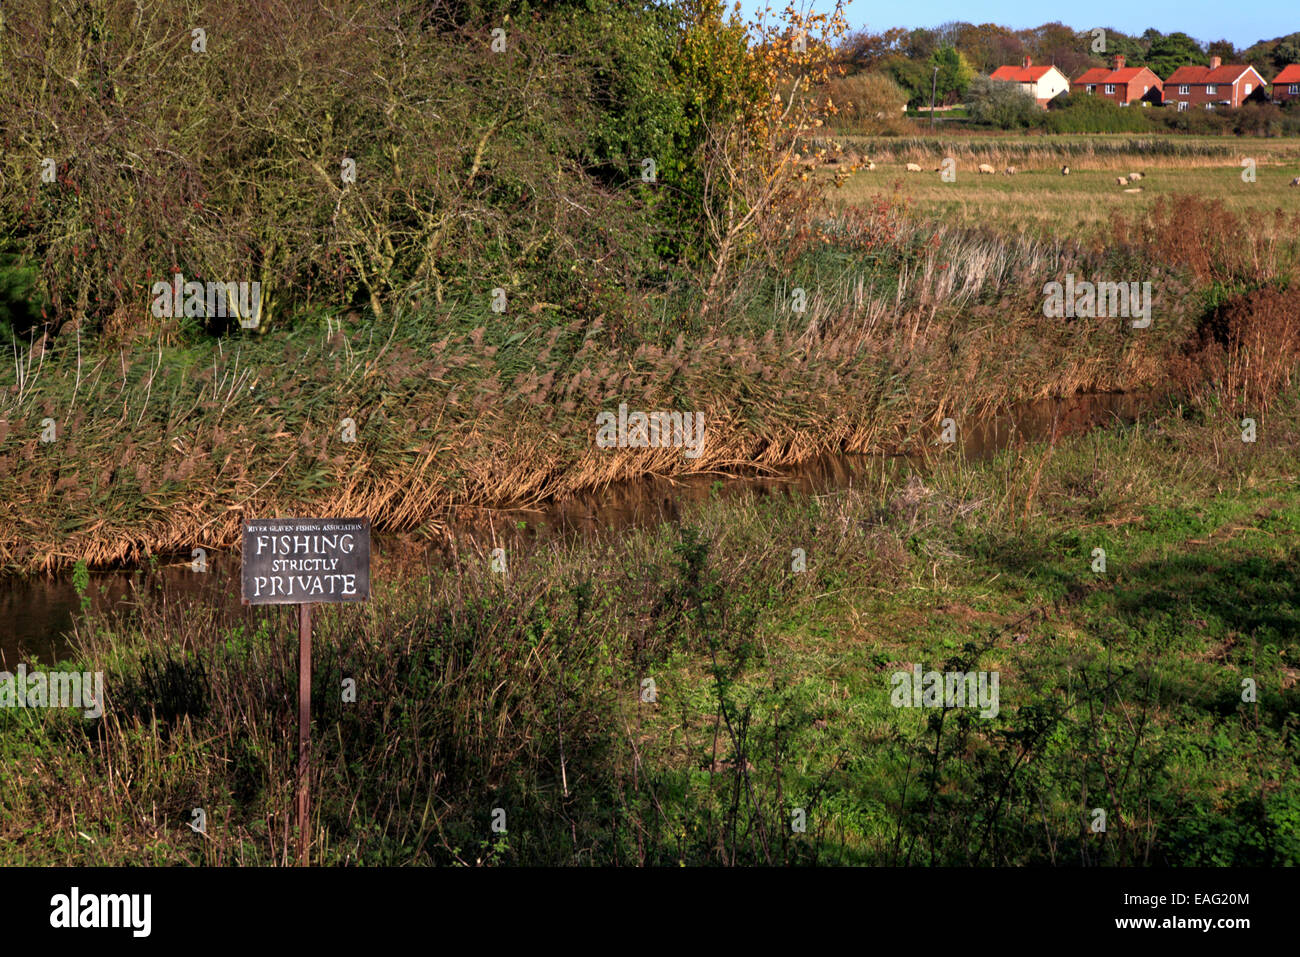 A view of the River Glaven with fishing strictly private notice at Wiveton, Norfolk, England, United Kingdom. Stock Photo